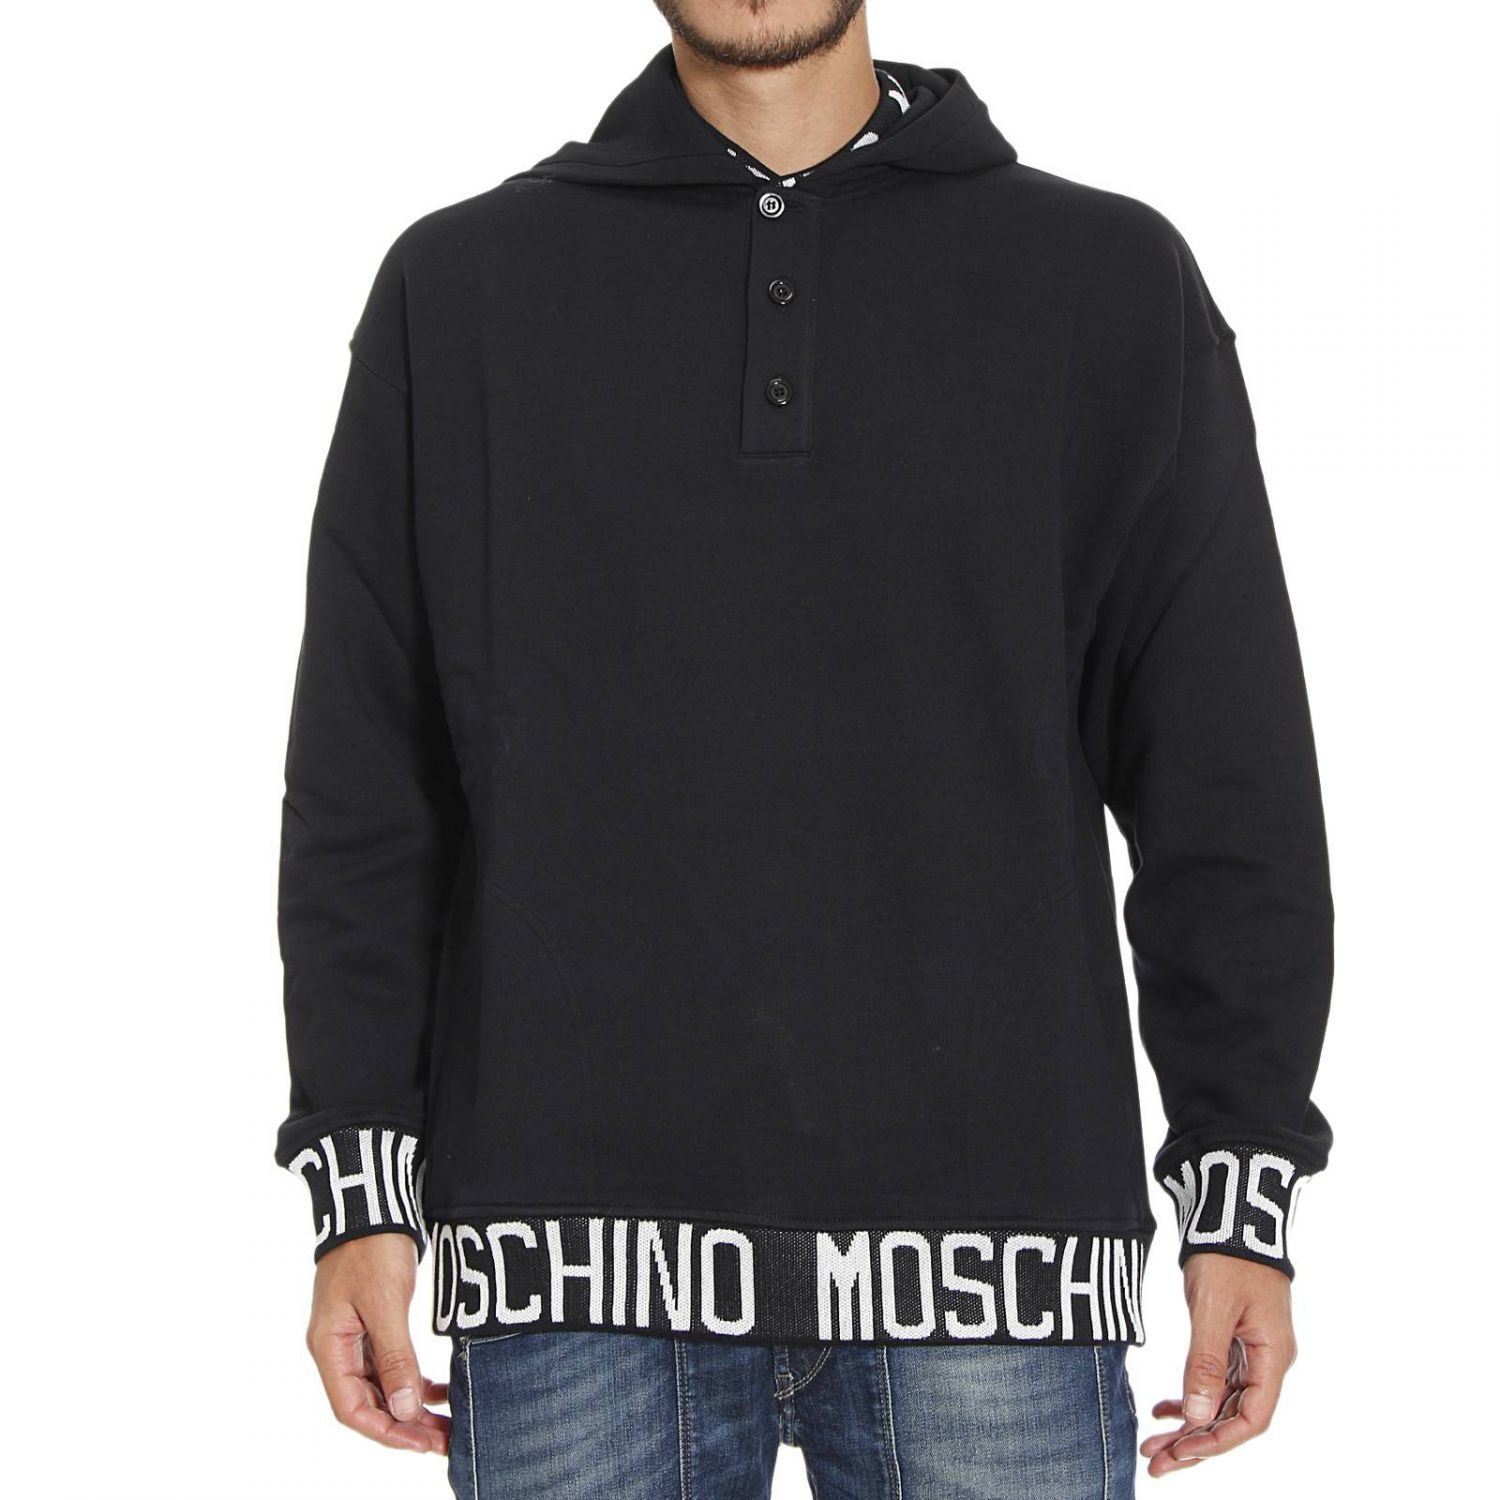 Lyst - Moschino Sweater in Black for Men